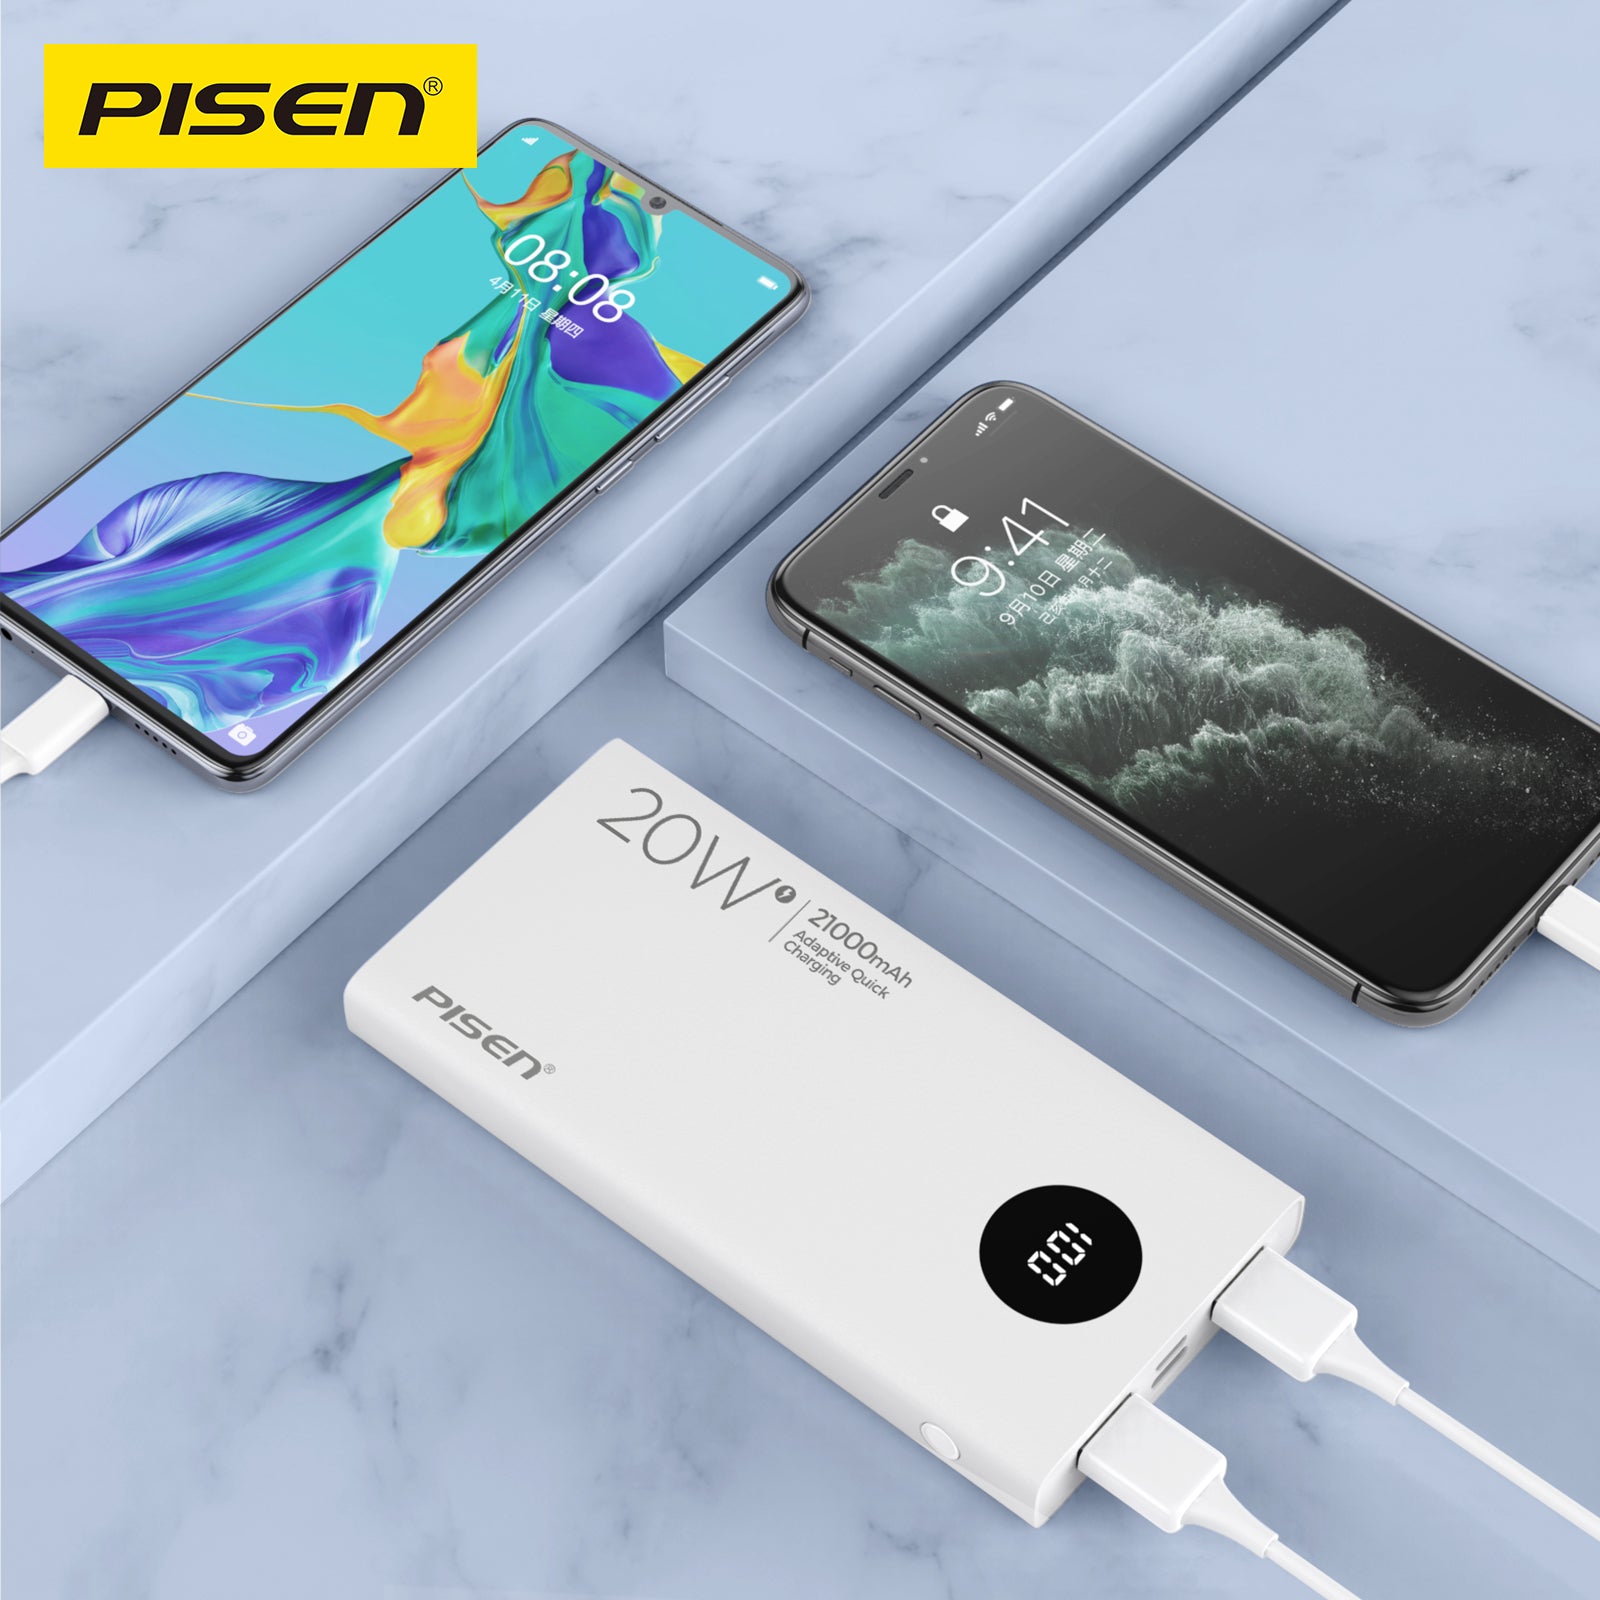 Pisen-Small white fast charge 21000(screen version)(Apple White) paper color box